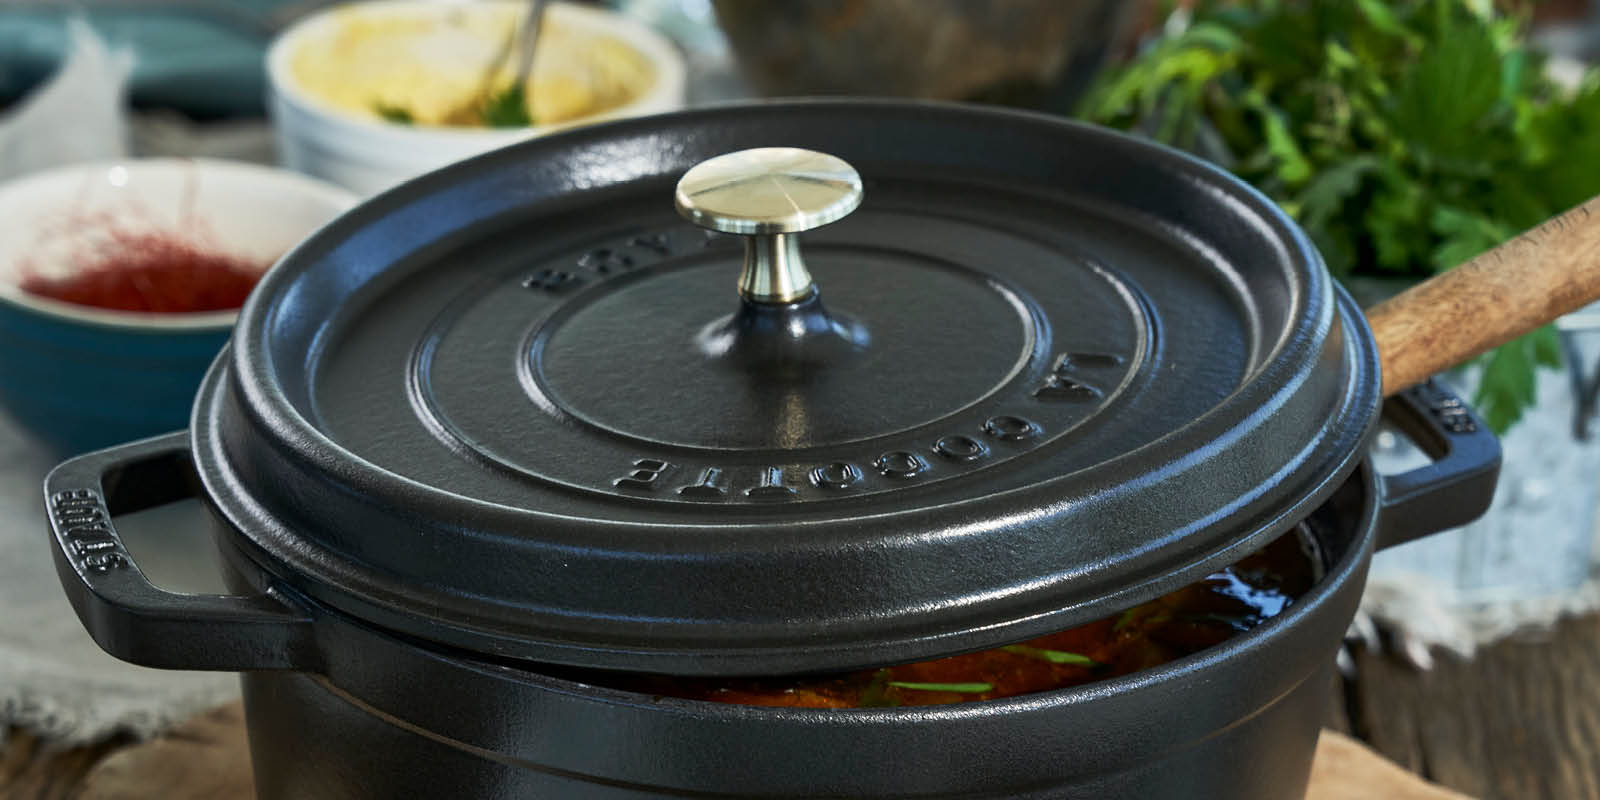 https://www.zwilling.com/on/demandware.static/-/Sites-zwilling-us-Library/default/dw2b52104d/images/product-content/masonry-content/staub/cast-iron/cocotte/40500-241-0_Lifestyle_Image_Series_OS_1200x600.jpg